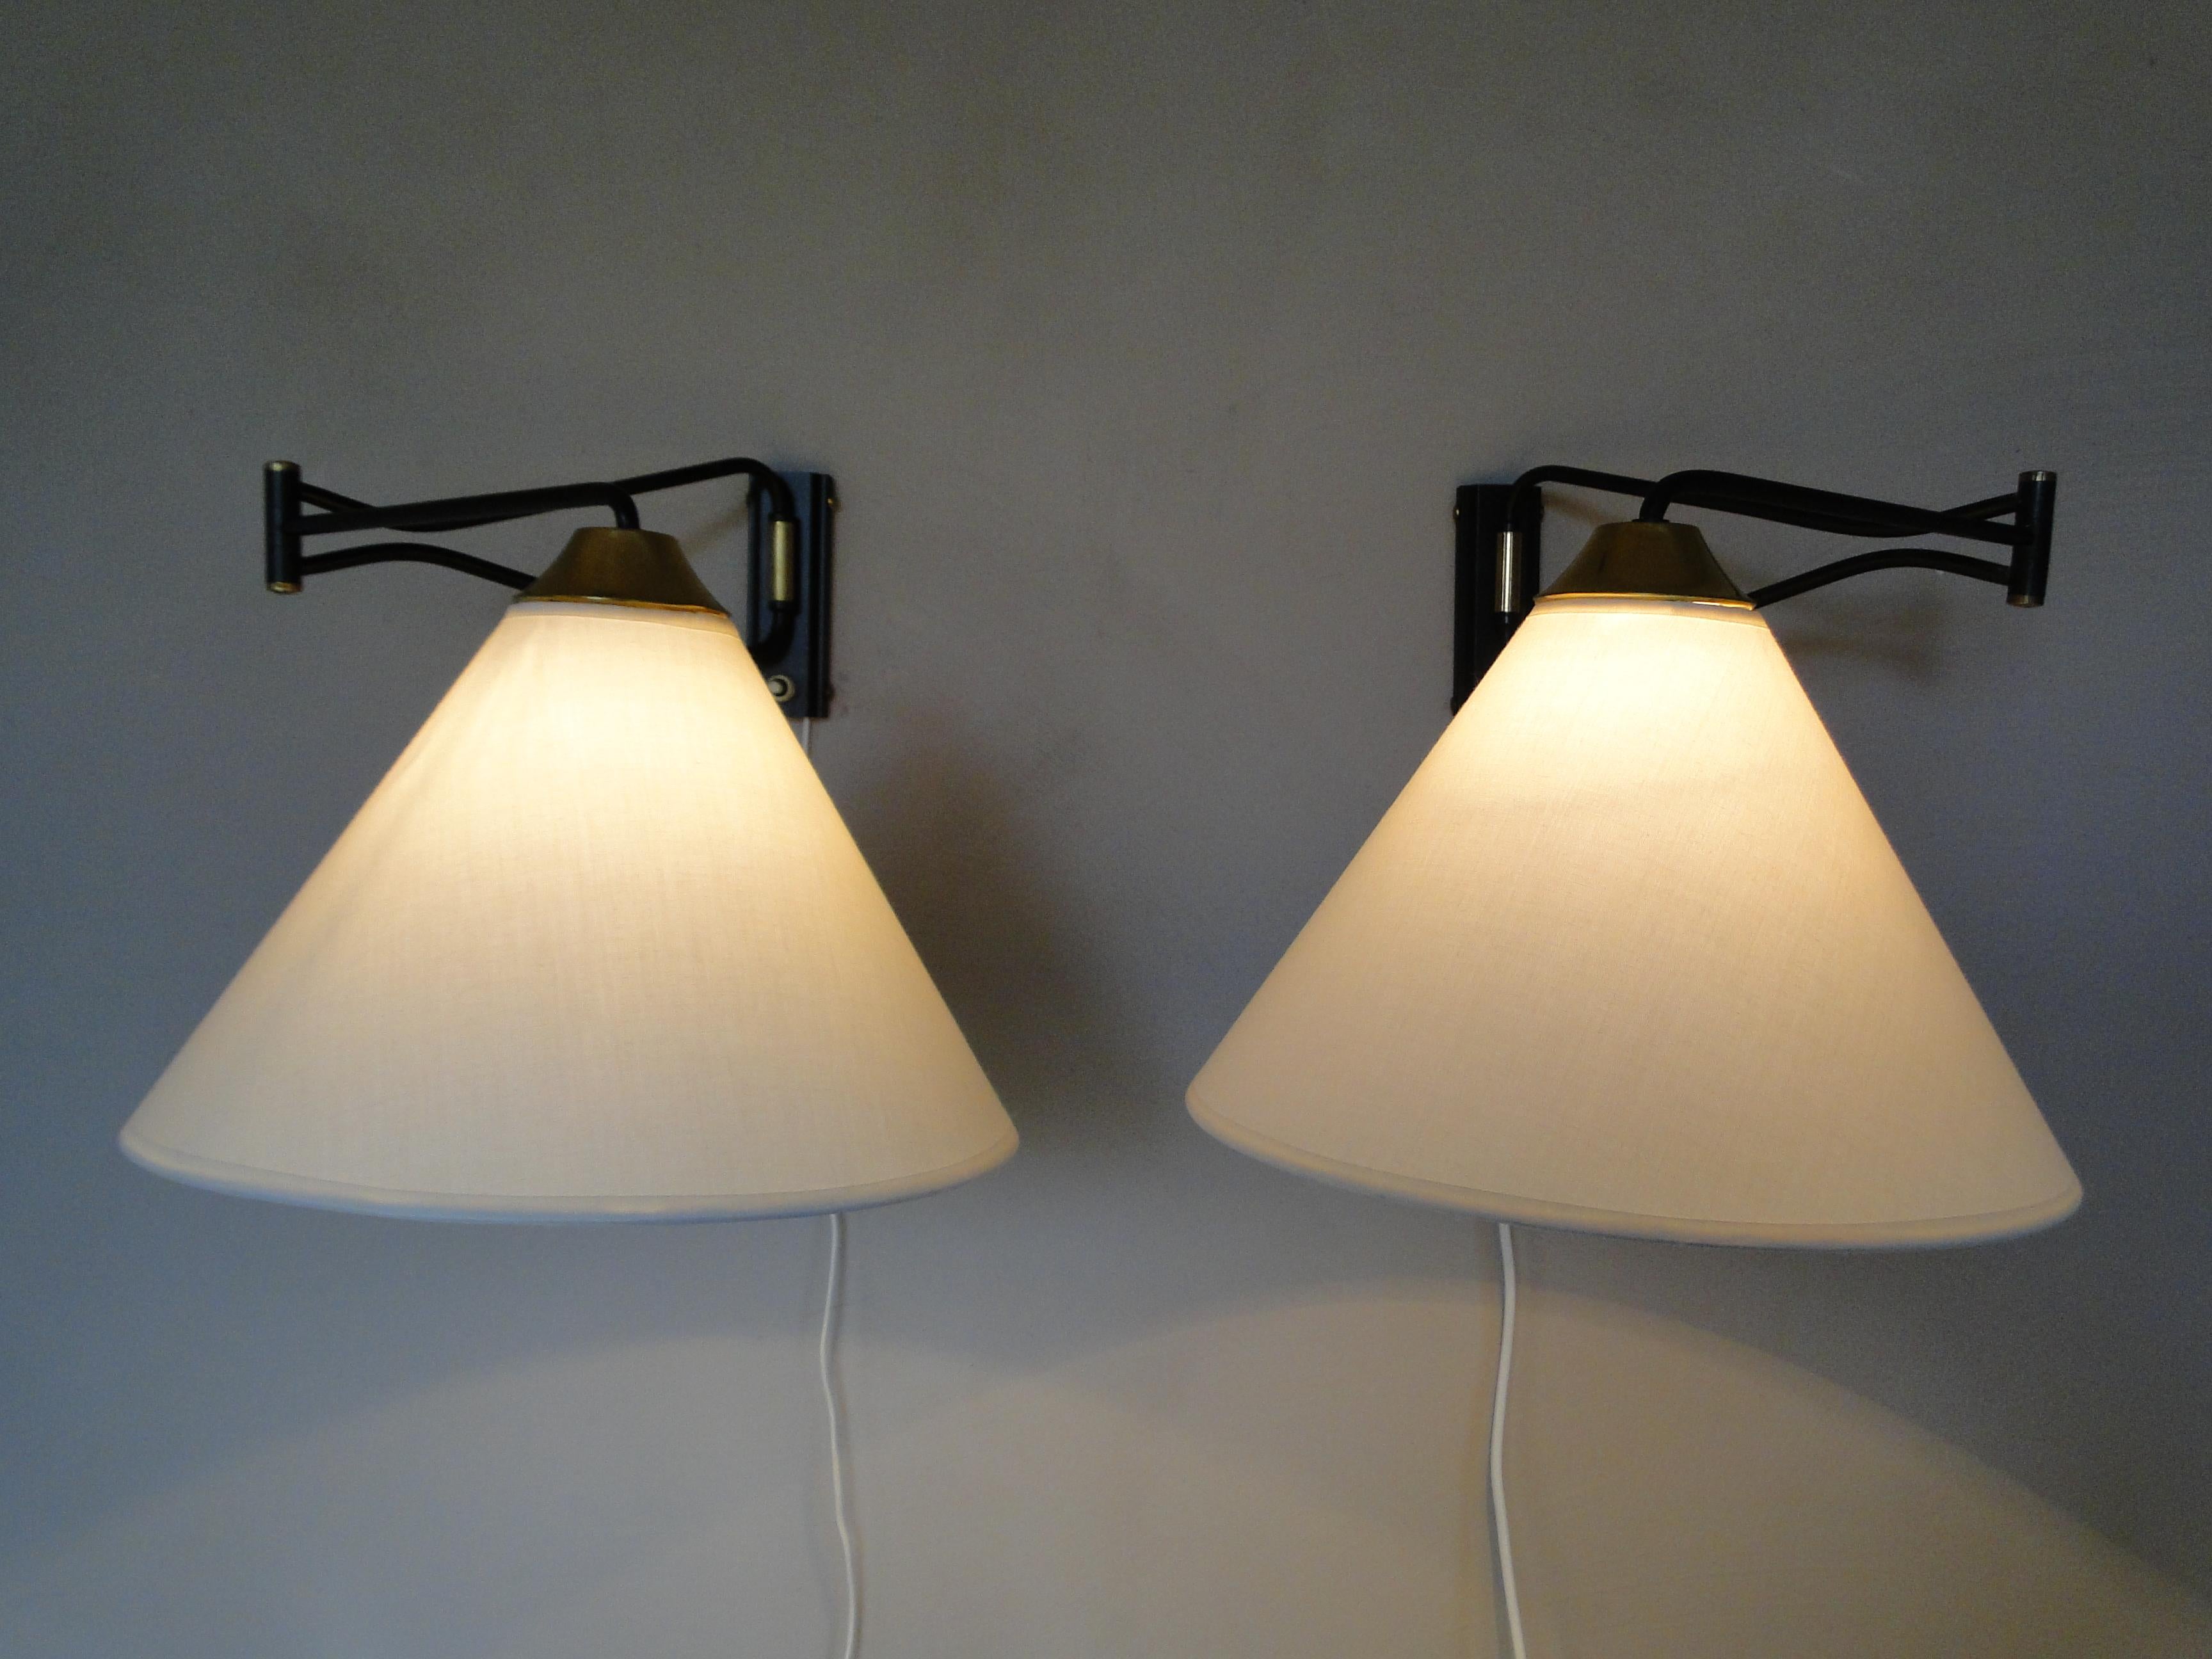 Superb pair of Swing arm sconces by Rene Mathieu, adjustable sconces.

US rewired and in working condition

Totally restored and refinished

1 light, 40 watts max bulb.



